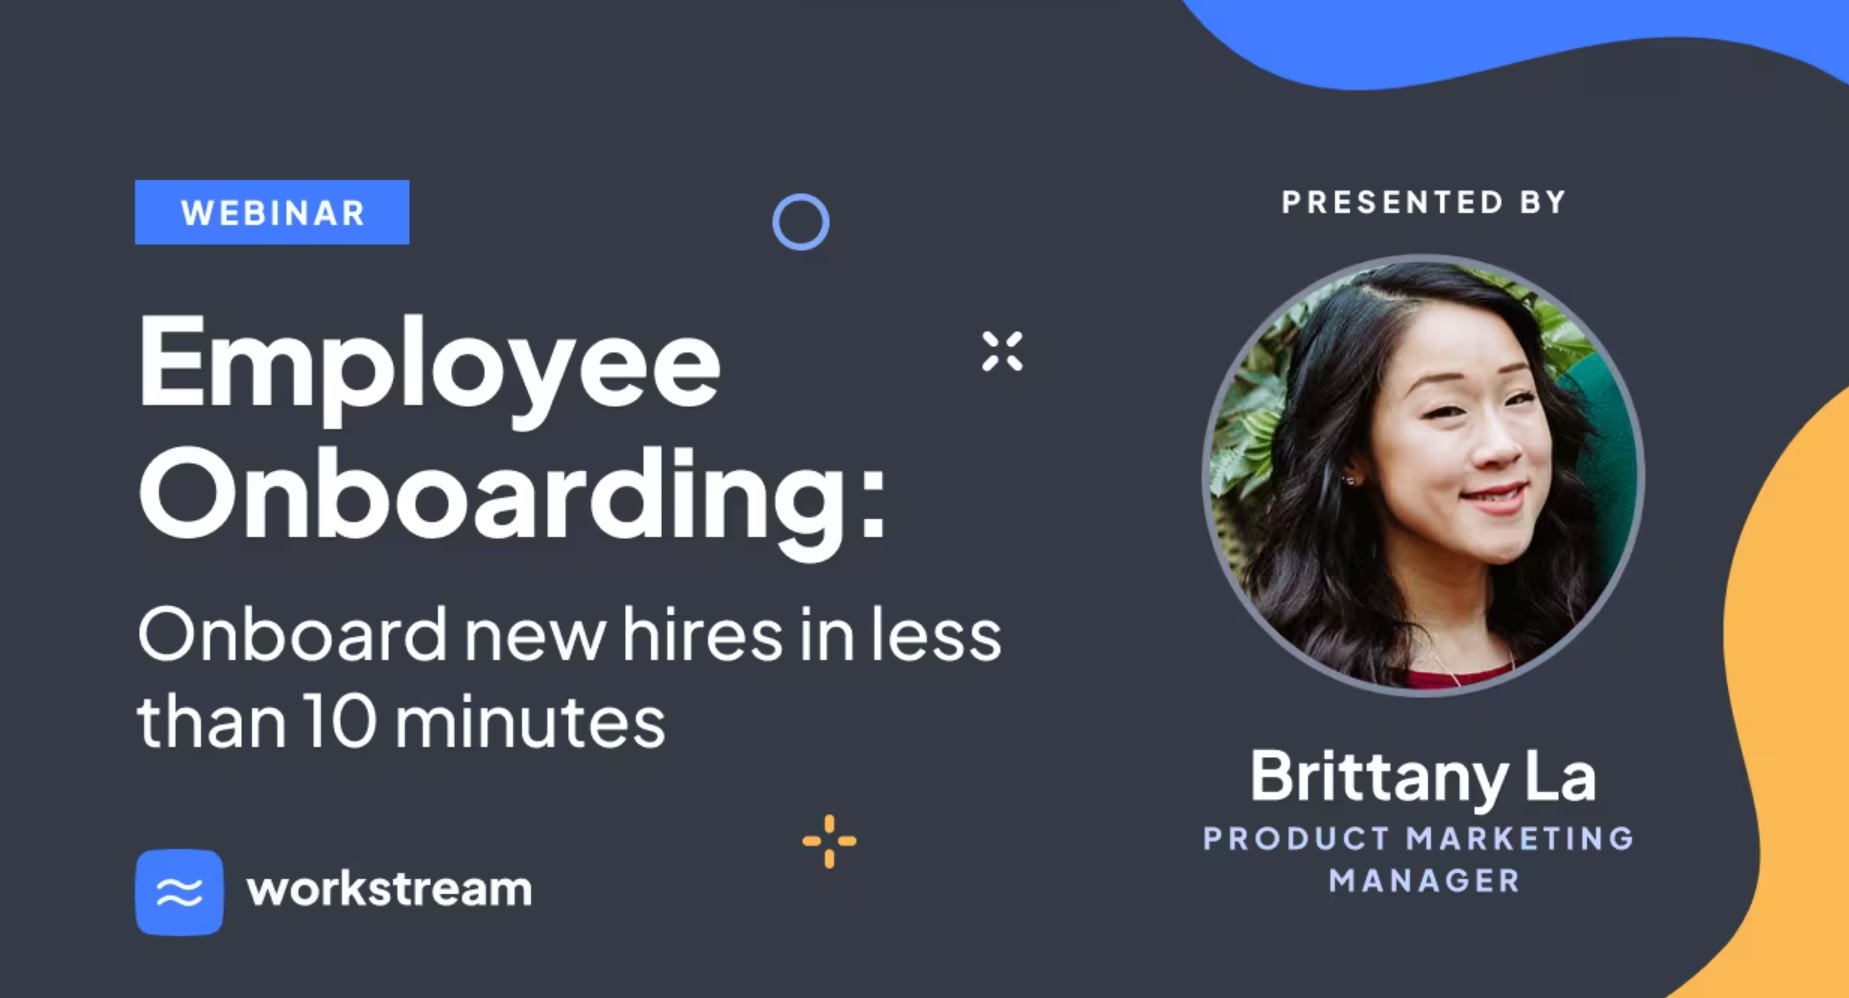 Employee Onboarding: Onboard new hires in less than 10 minutes